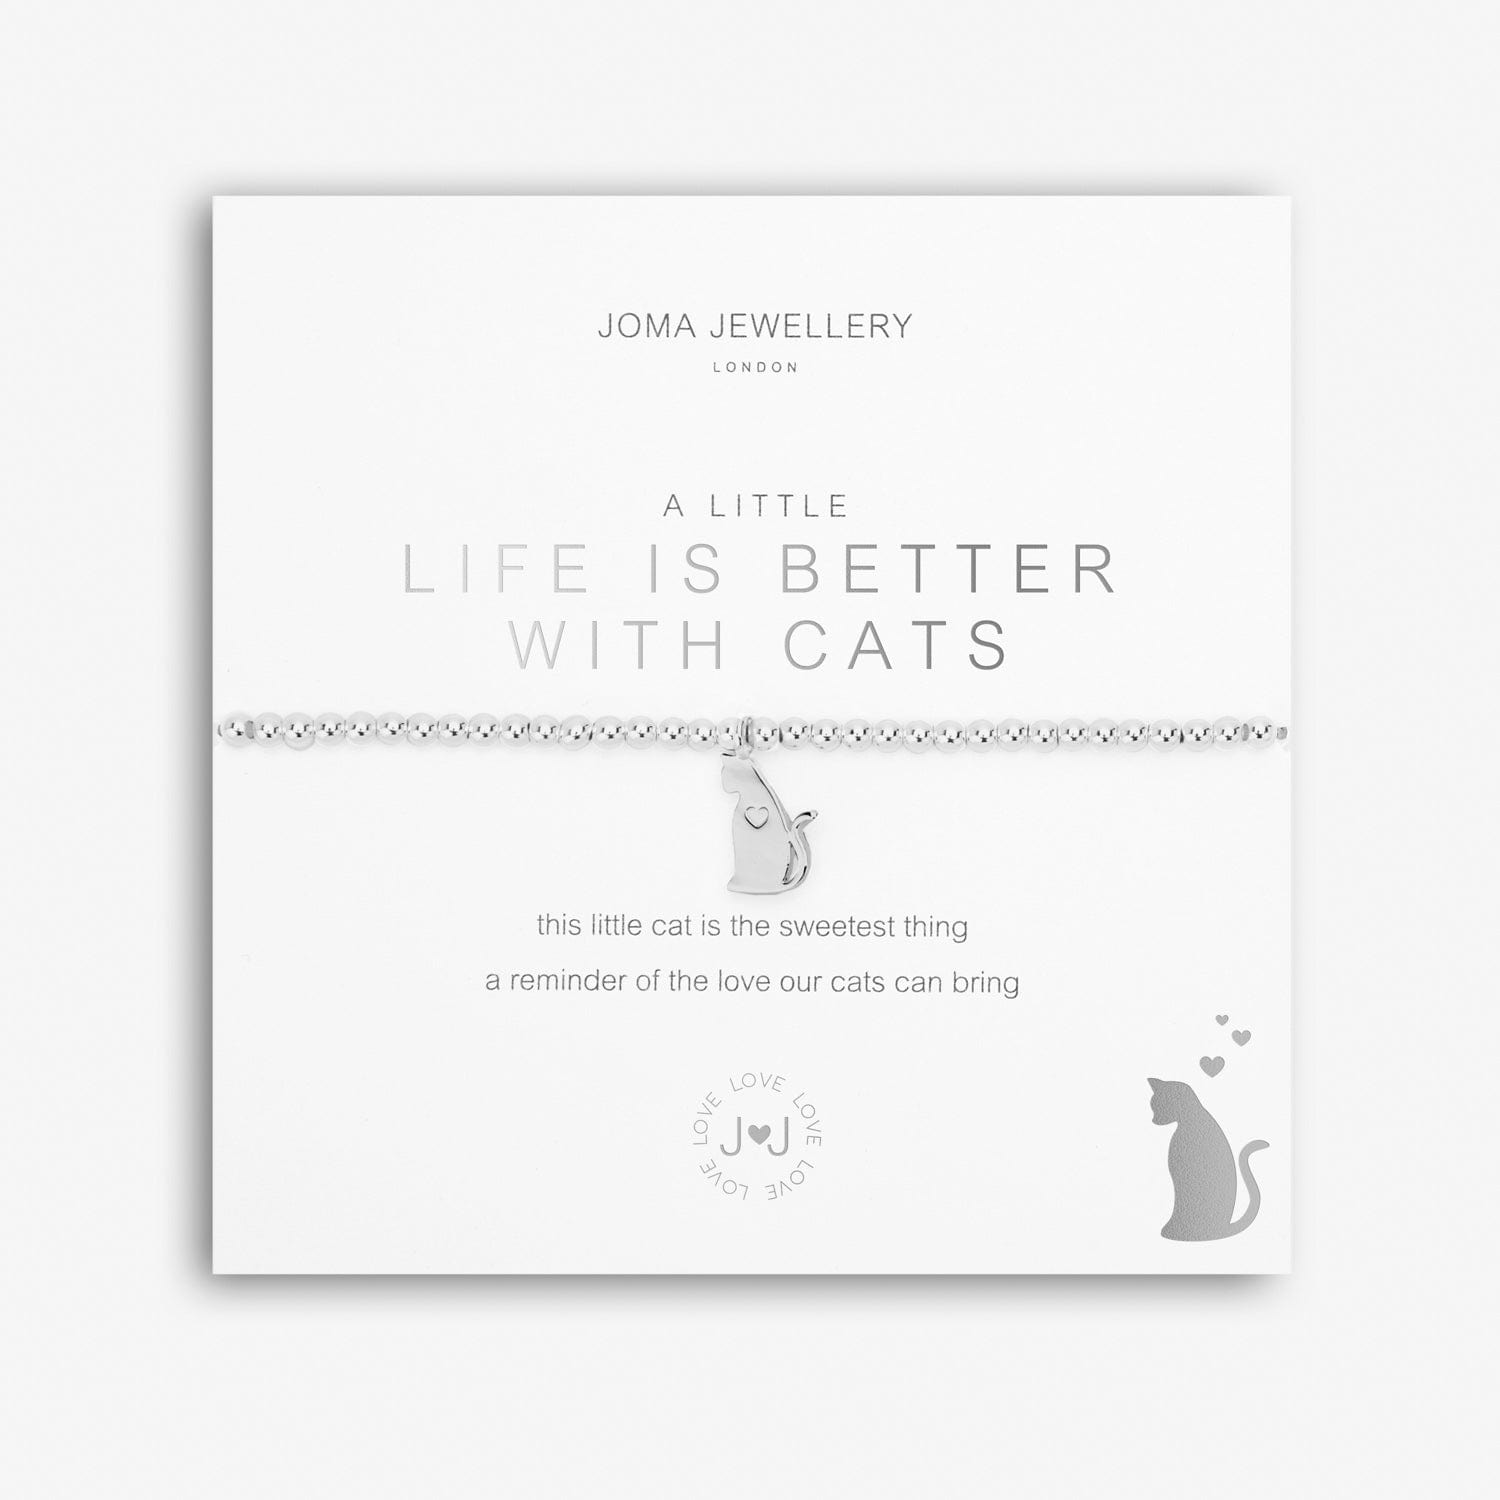 Joma Jewellery Bracelet Joma Jewellery Bracelet - A Little Life is Better with Cats